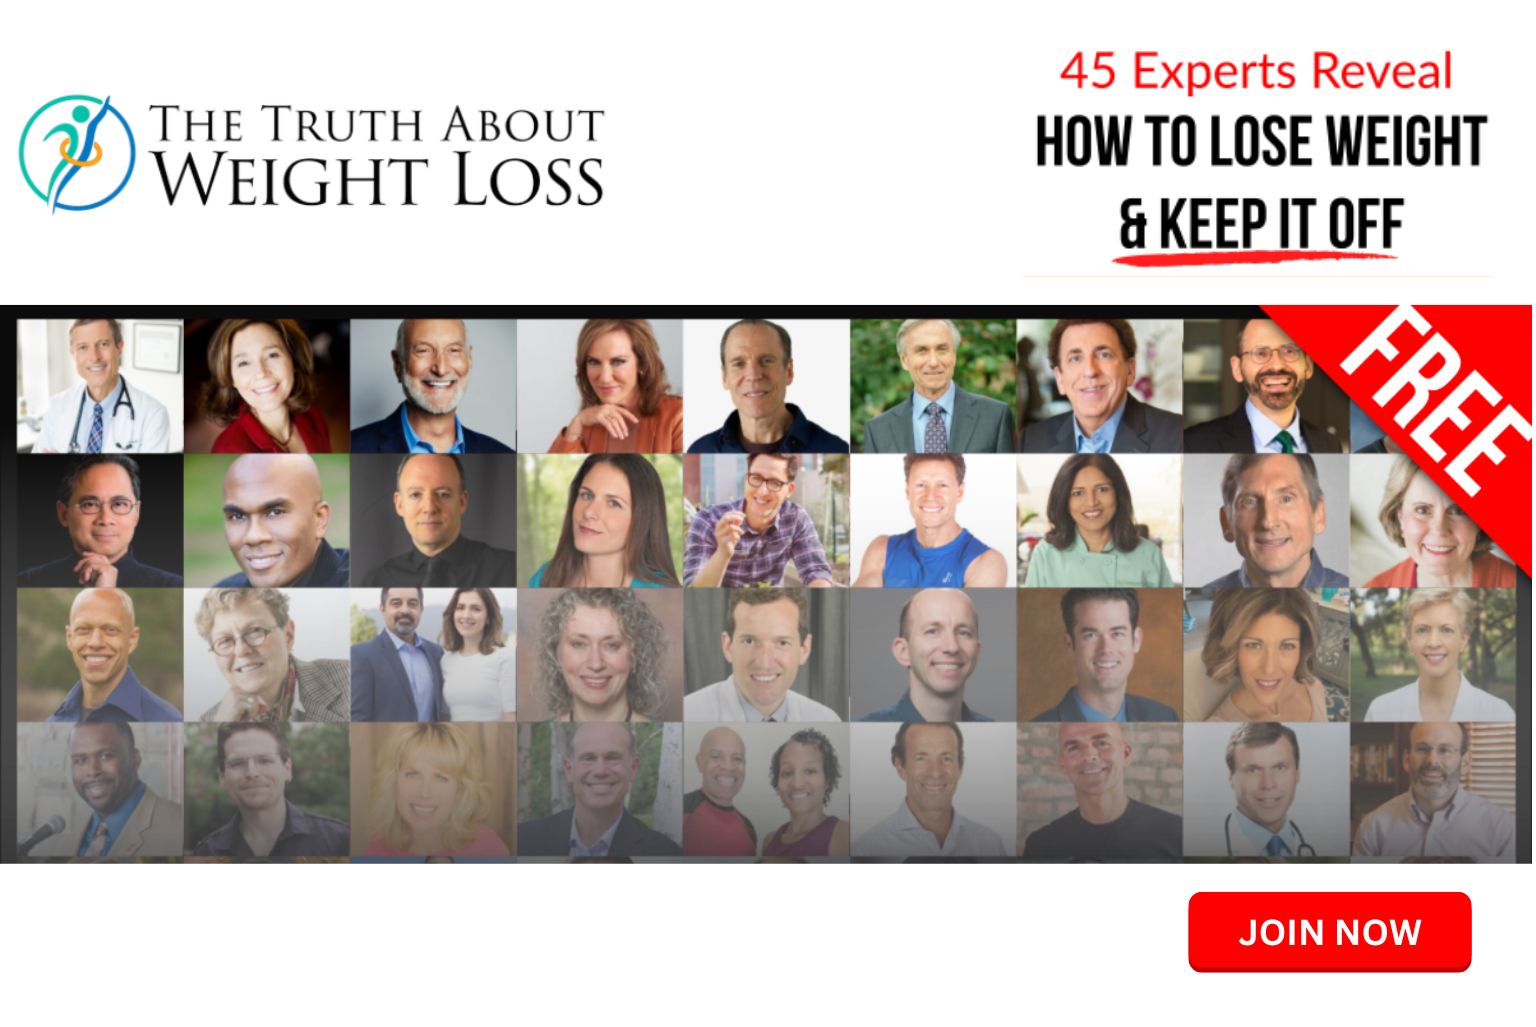 Click here to register for The Truth About Weight Loss online summit. Learn from 45 of the world's top experts for FREE.